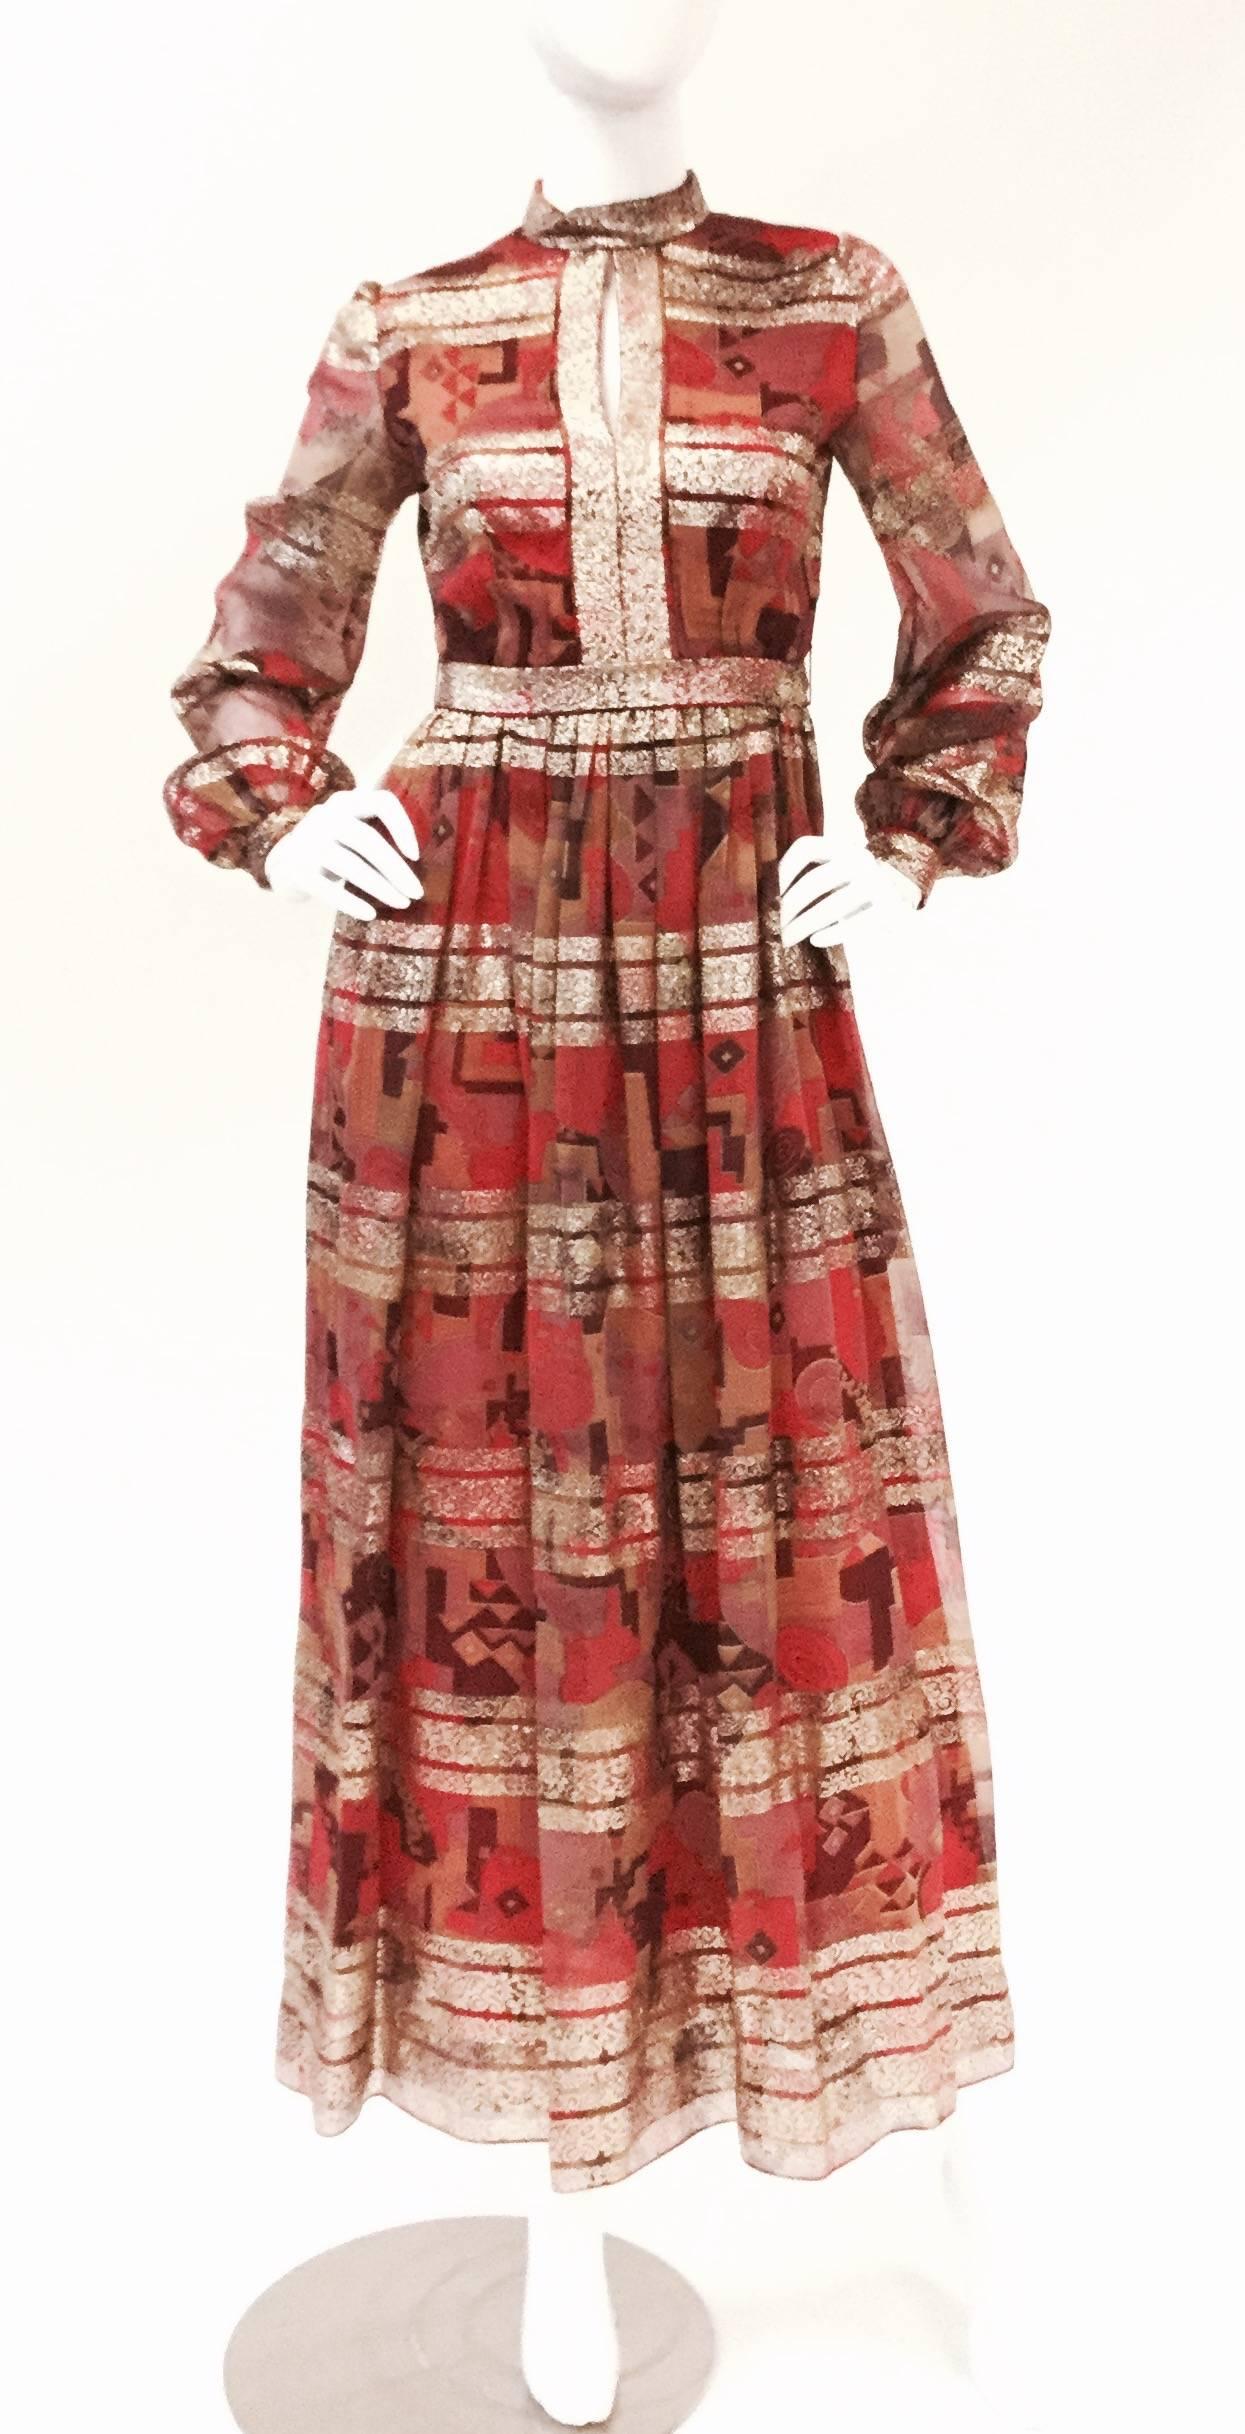 
Gorgeous geometric print gown with  by Elinor Simmons for Malcolm Starr. This dress has a high collar with keyhole neckline, natural waistline ankle-length skirt, and voluminous shirtwaist sleeve. The geometric print features horizontal stripes